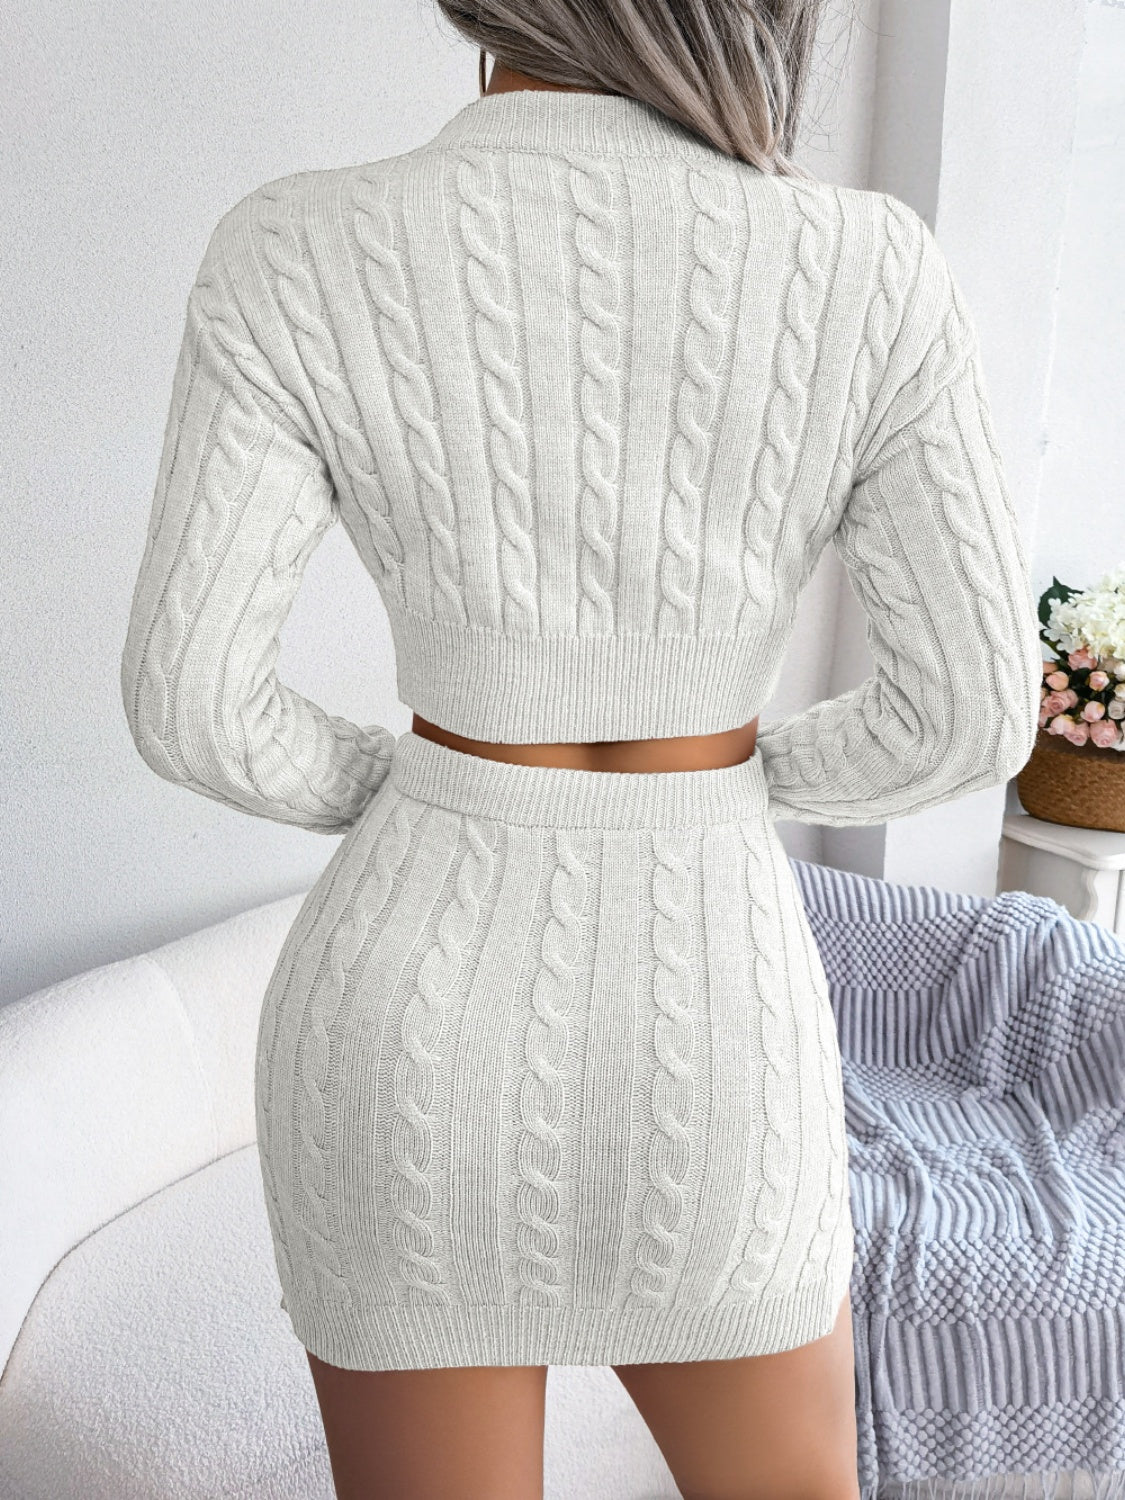 Cable-Knit Round Neck Top and Skirt Sweater Set Apparel and Accessories